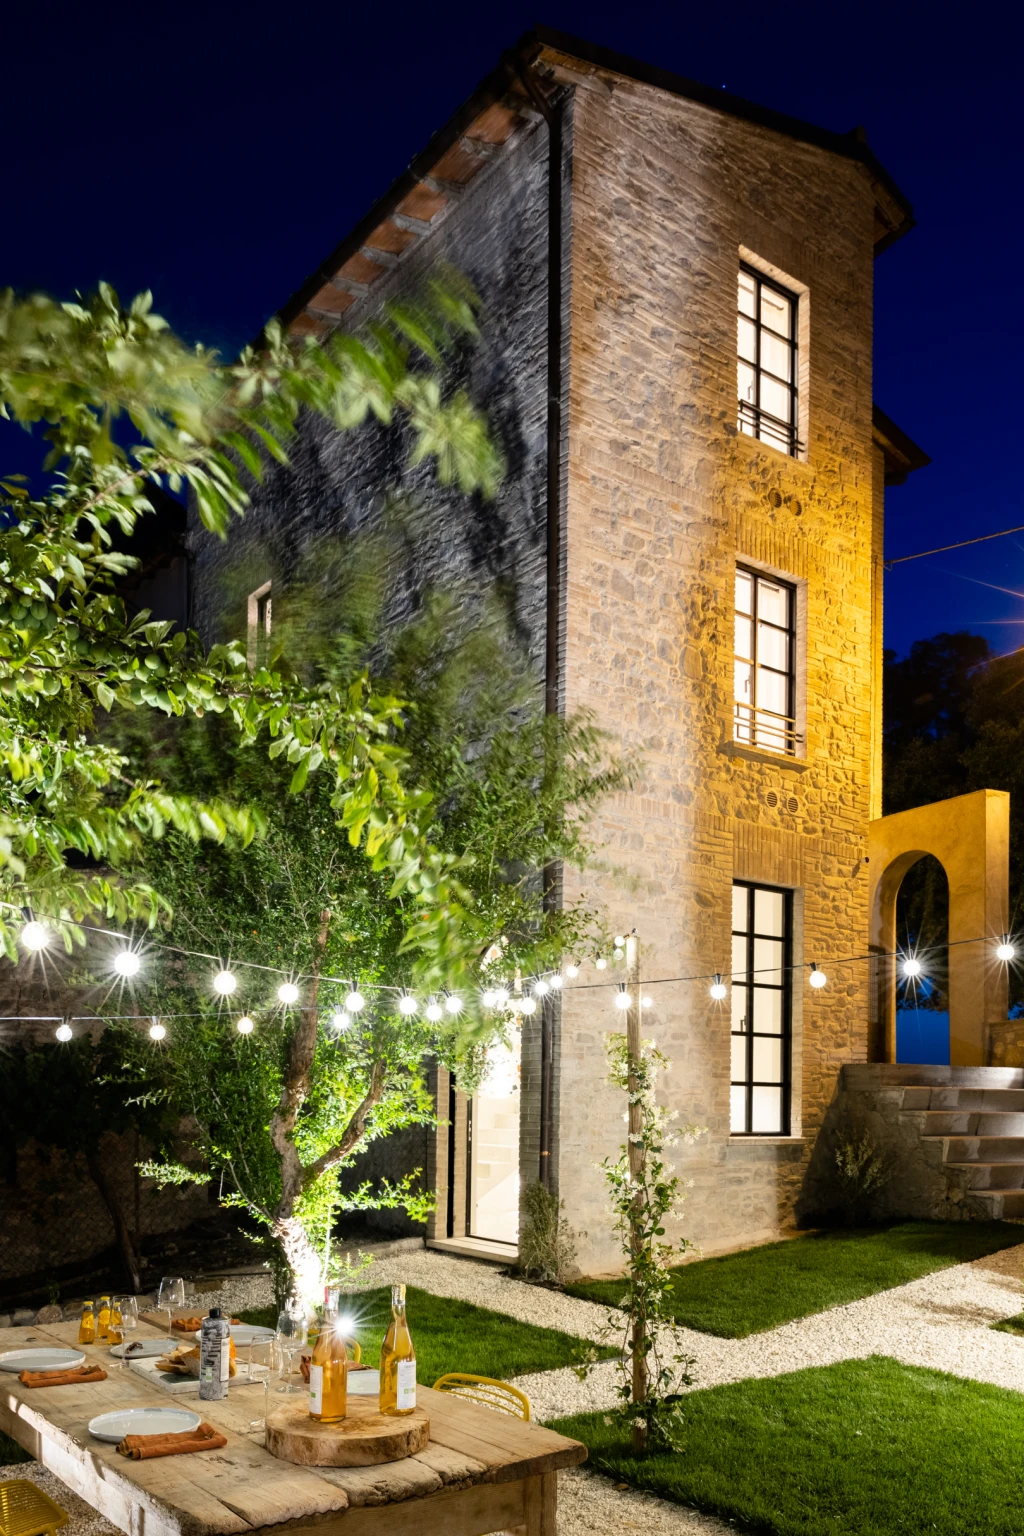 Outdoor dinners all summer long in this little gem in Umbria